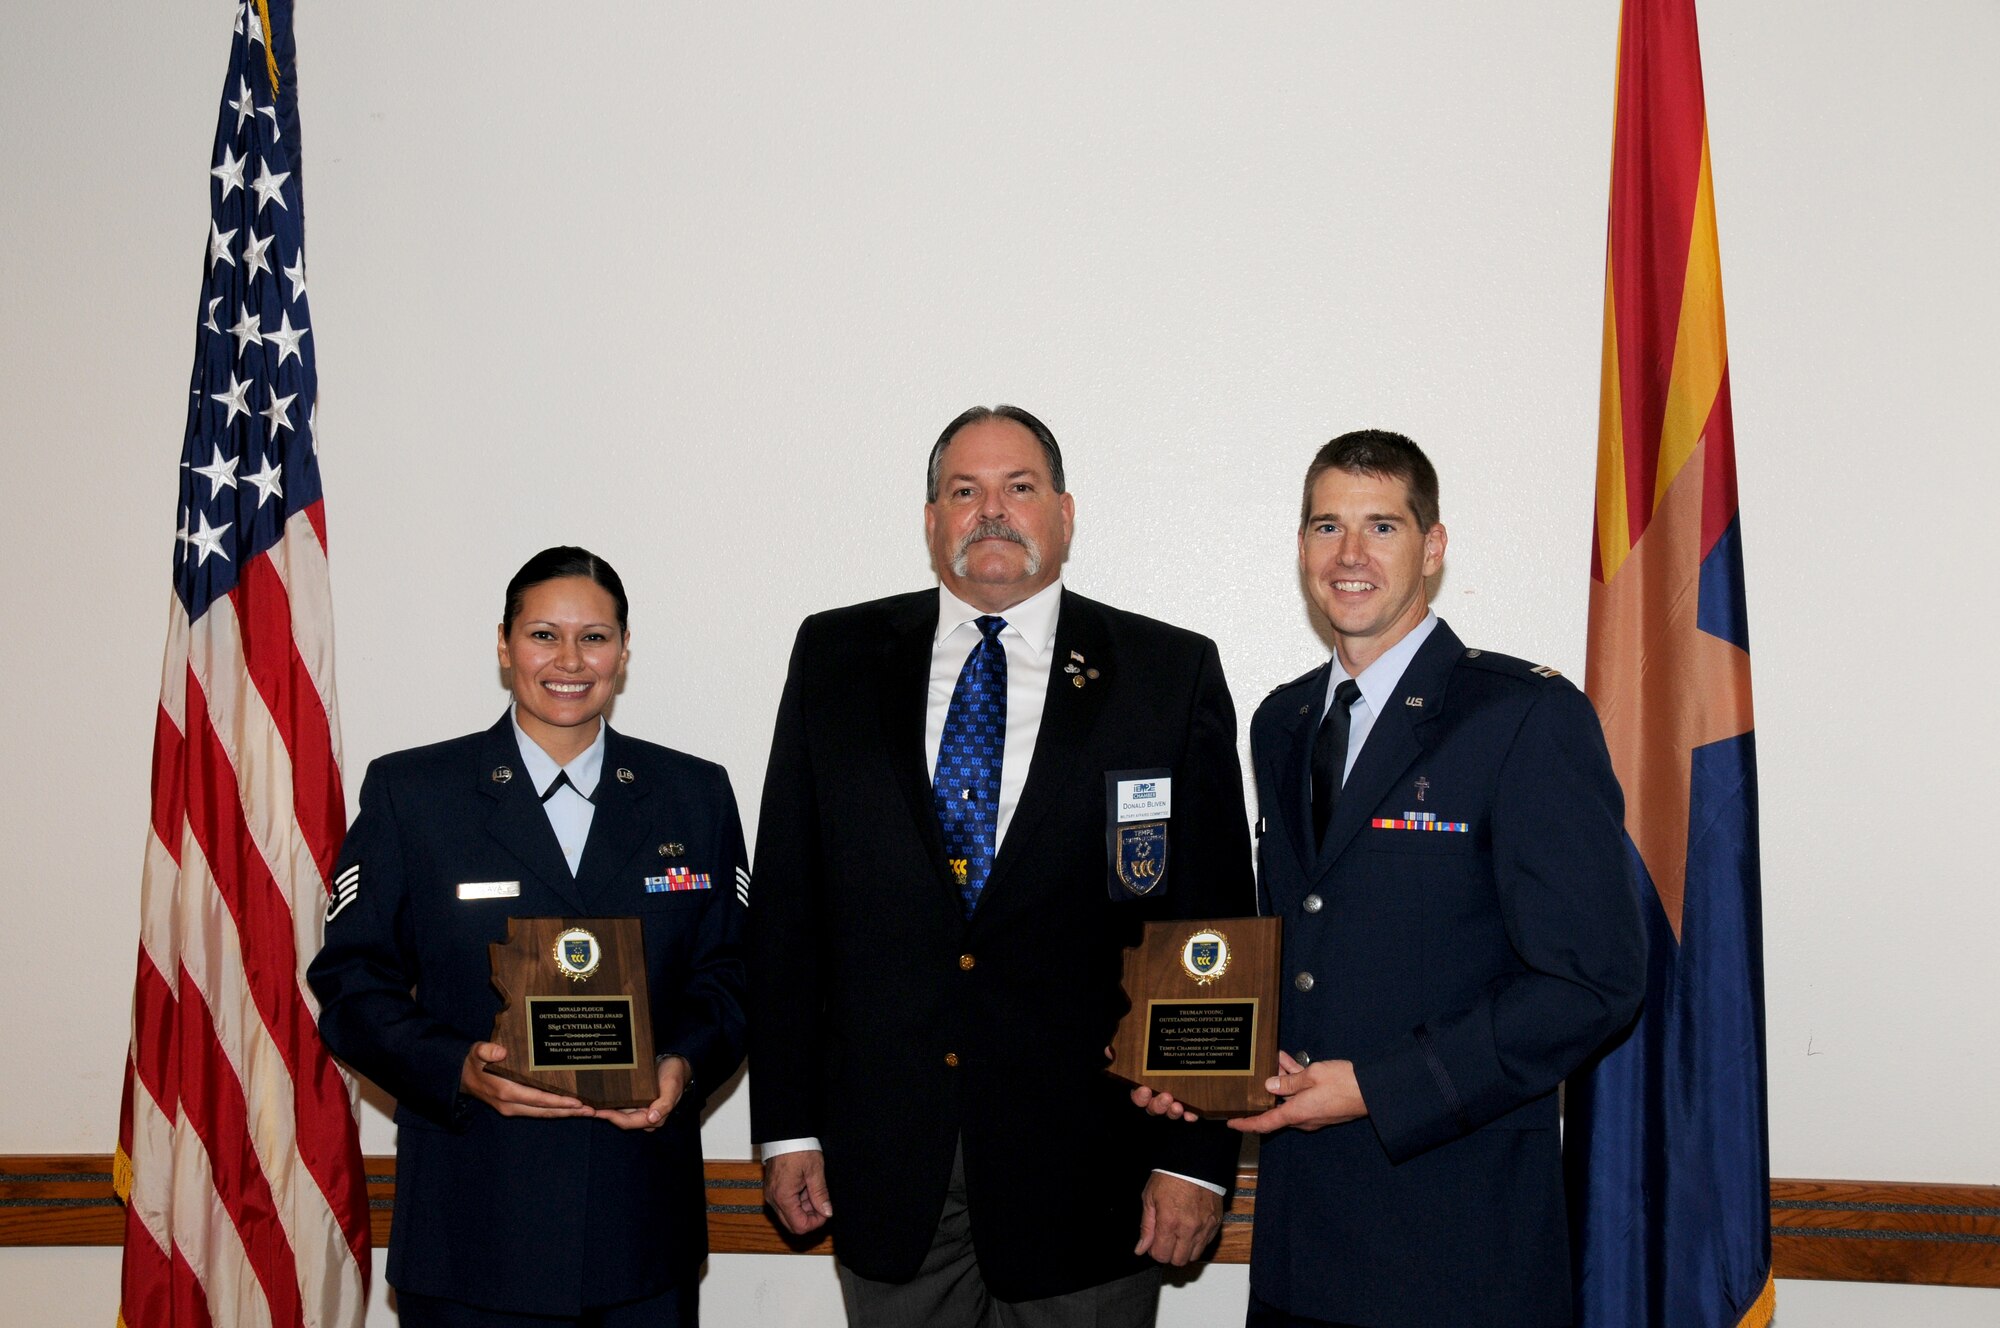 Tech. Sgt. Cynthia Islava (left) and Capt. Lance Schrader (right) are shown with Tempe Military Affairs Committee member Don Bliven after the presentation of awards September 15, 2010. (U.S. Air Force photo/Master Sgt. Kelly Deitloff) 